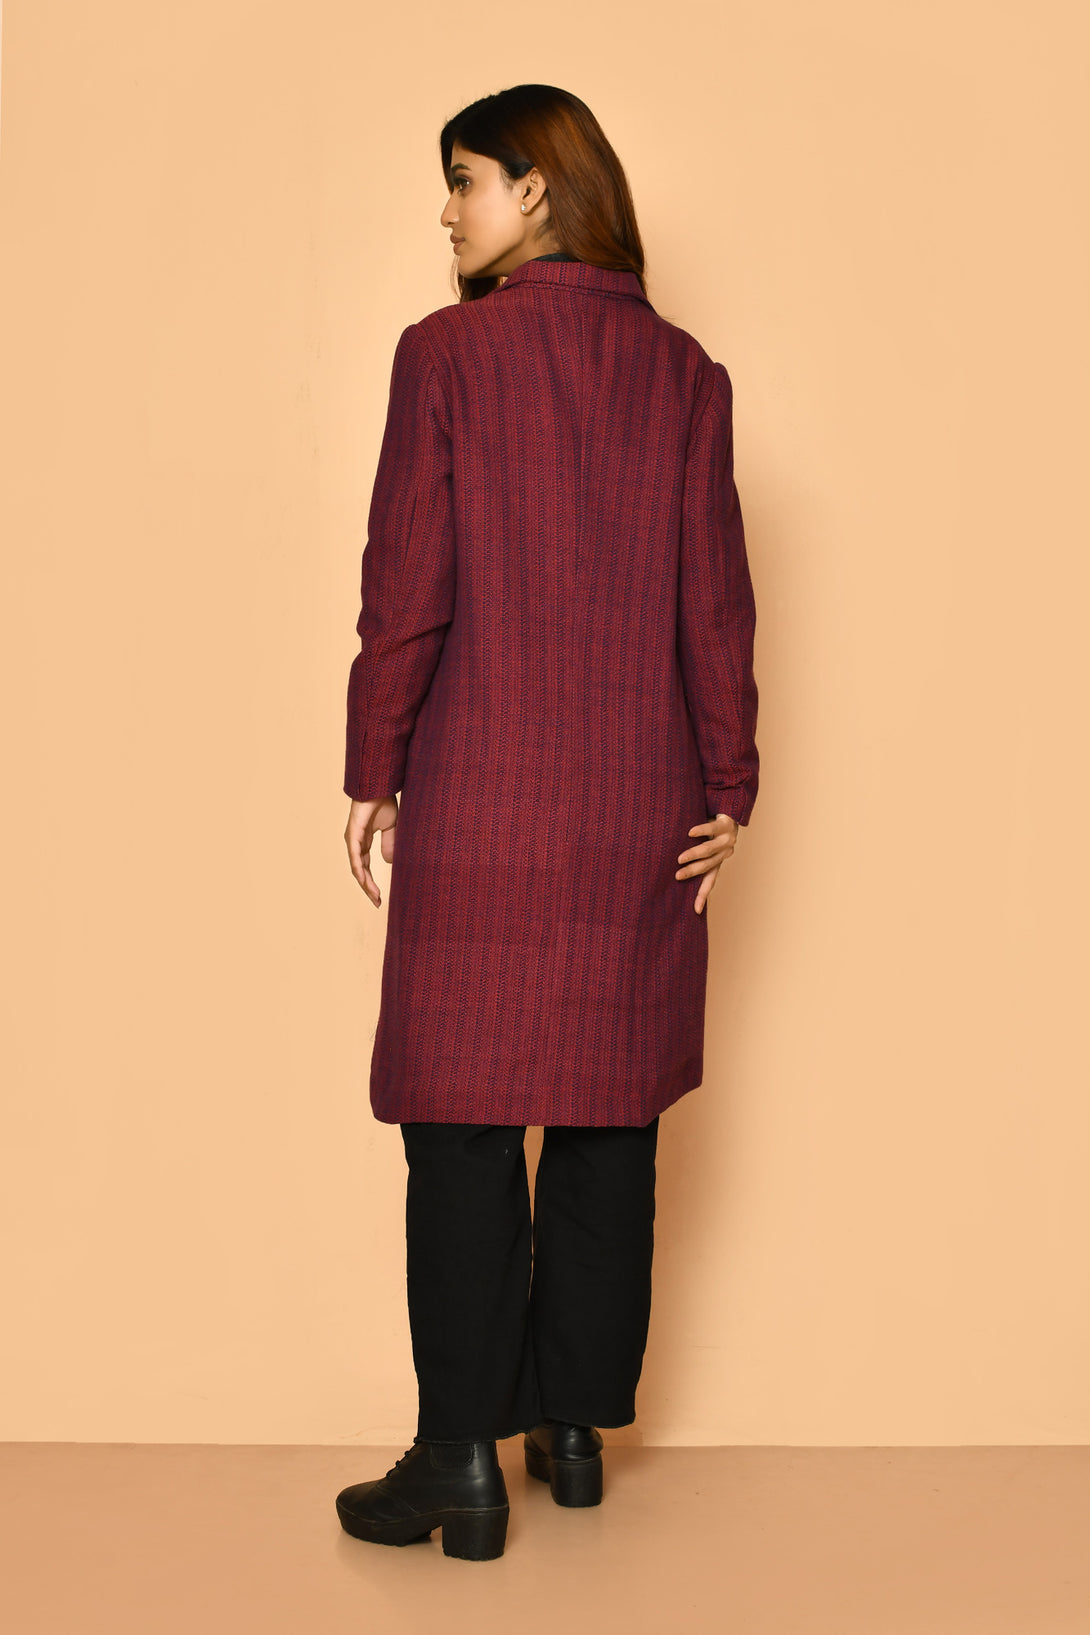 Add this exclusive handloom long cotton trench coat woman's  jacket  to your work wear wardrobe